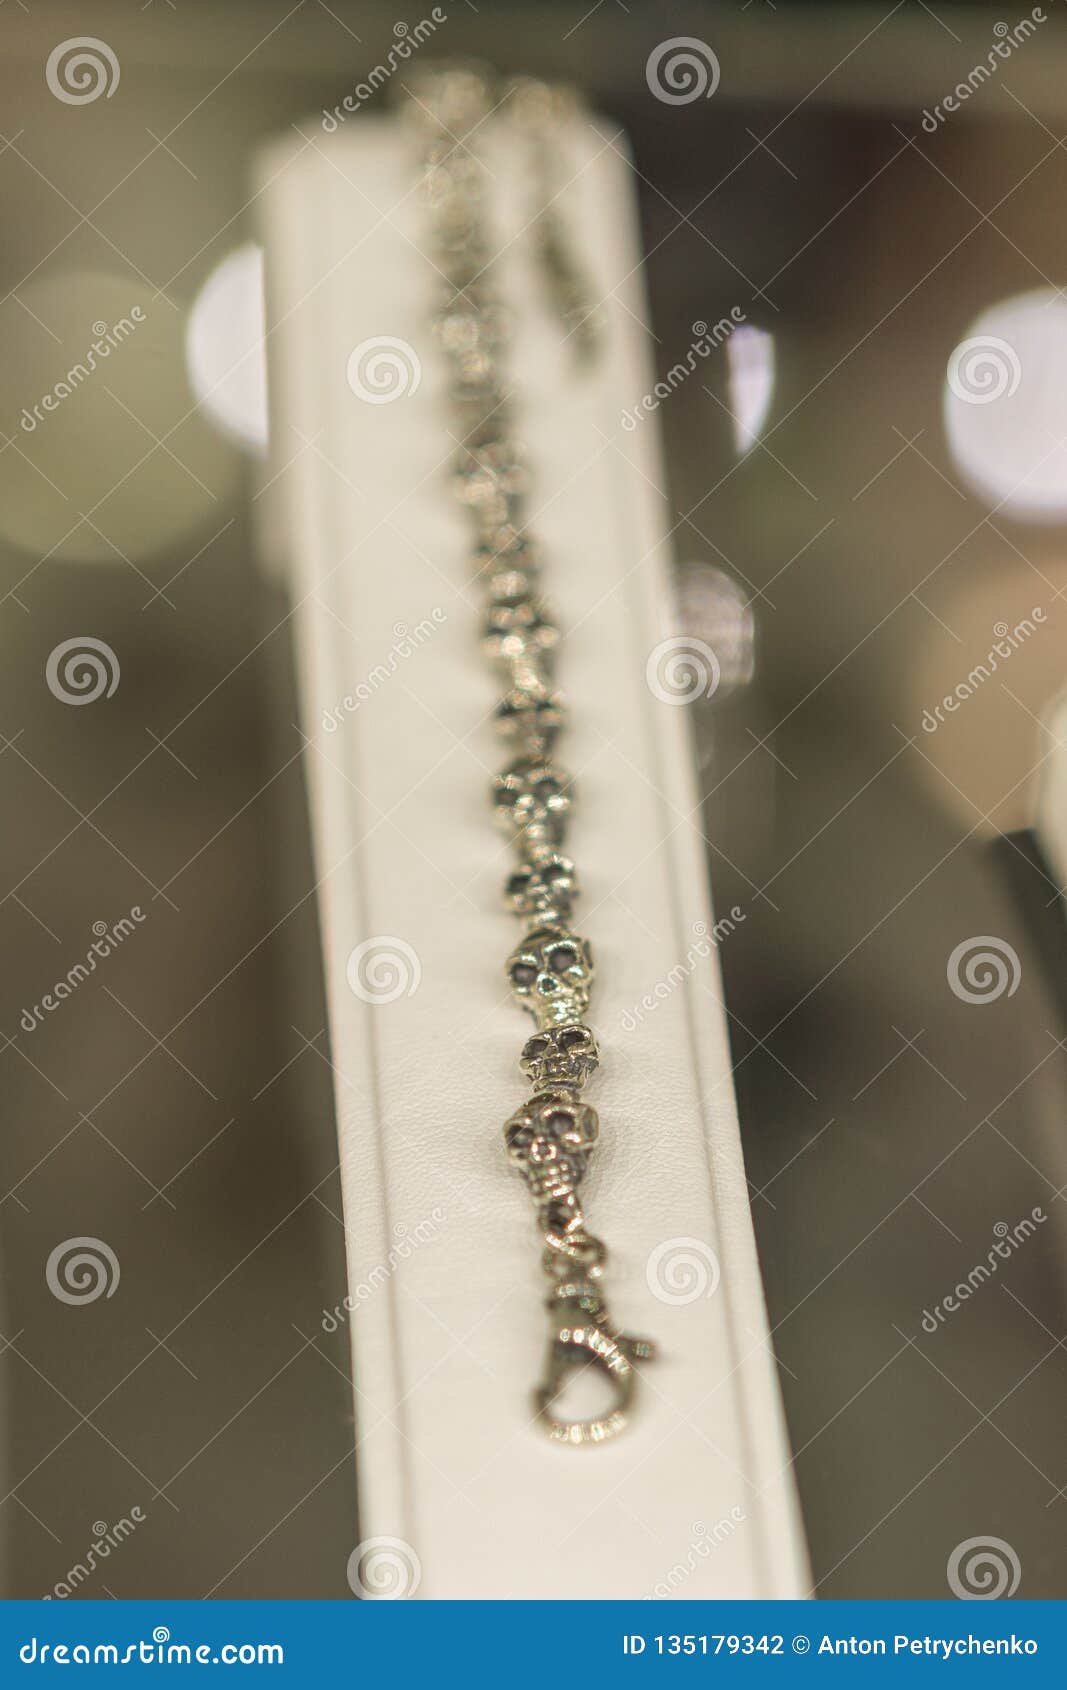 silver bracelet with skulls on the wind. selected focus. vertical photo